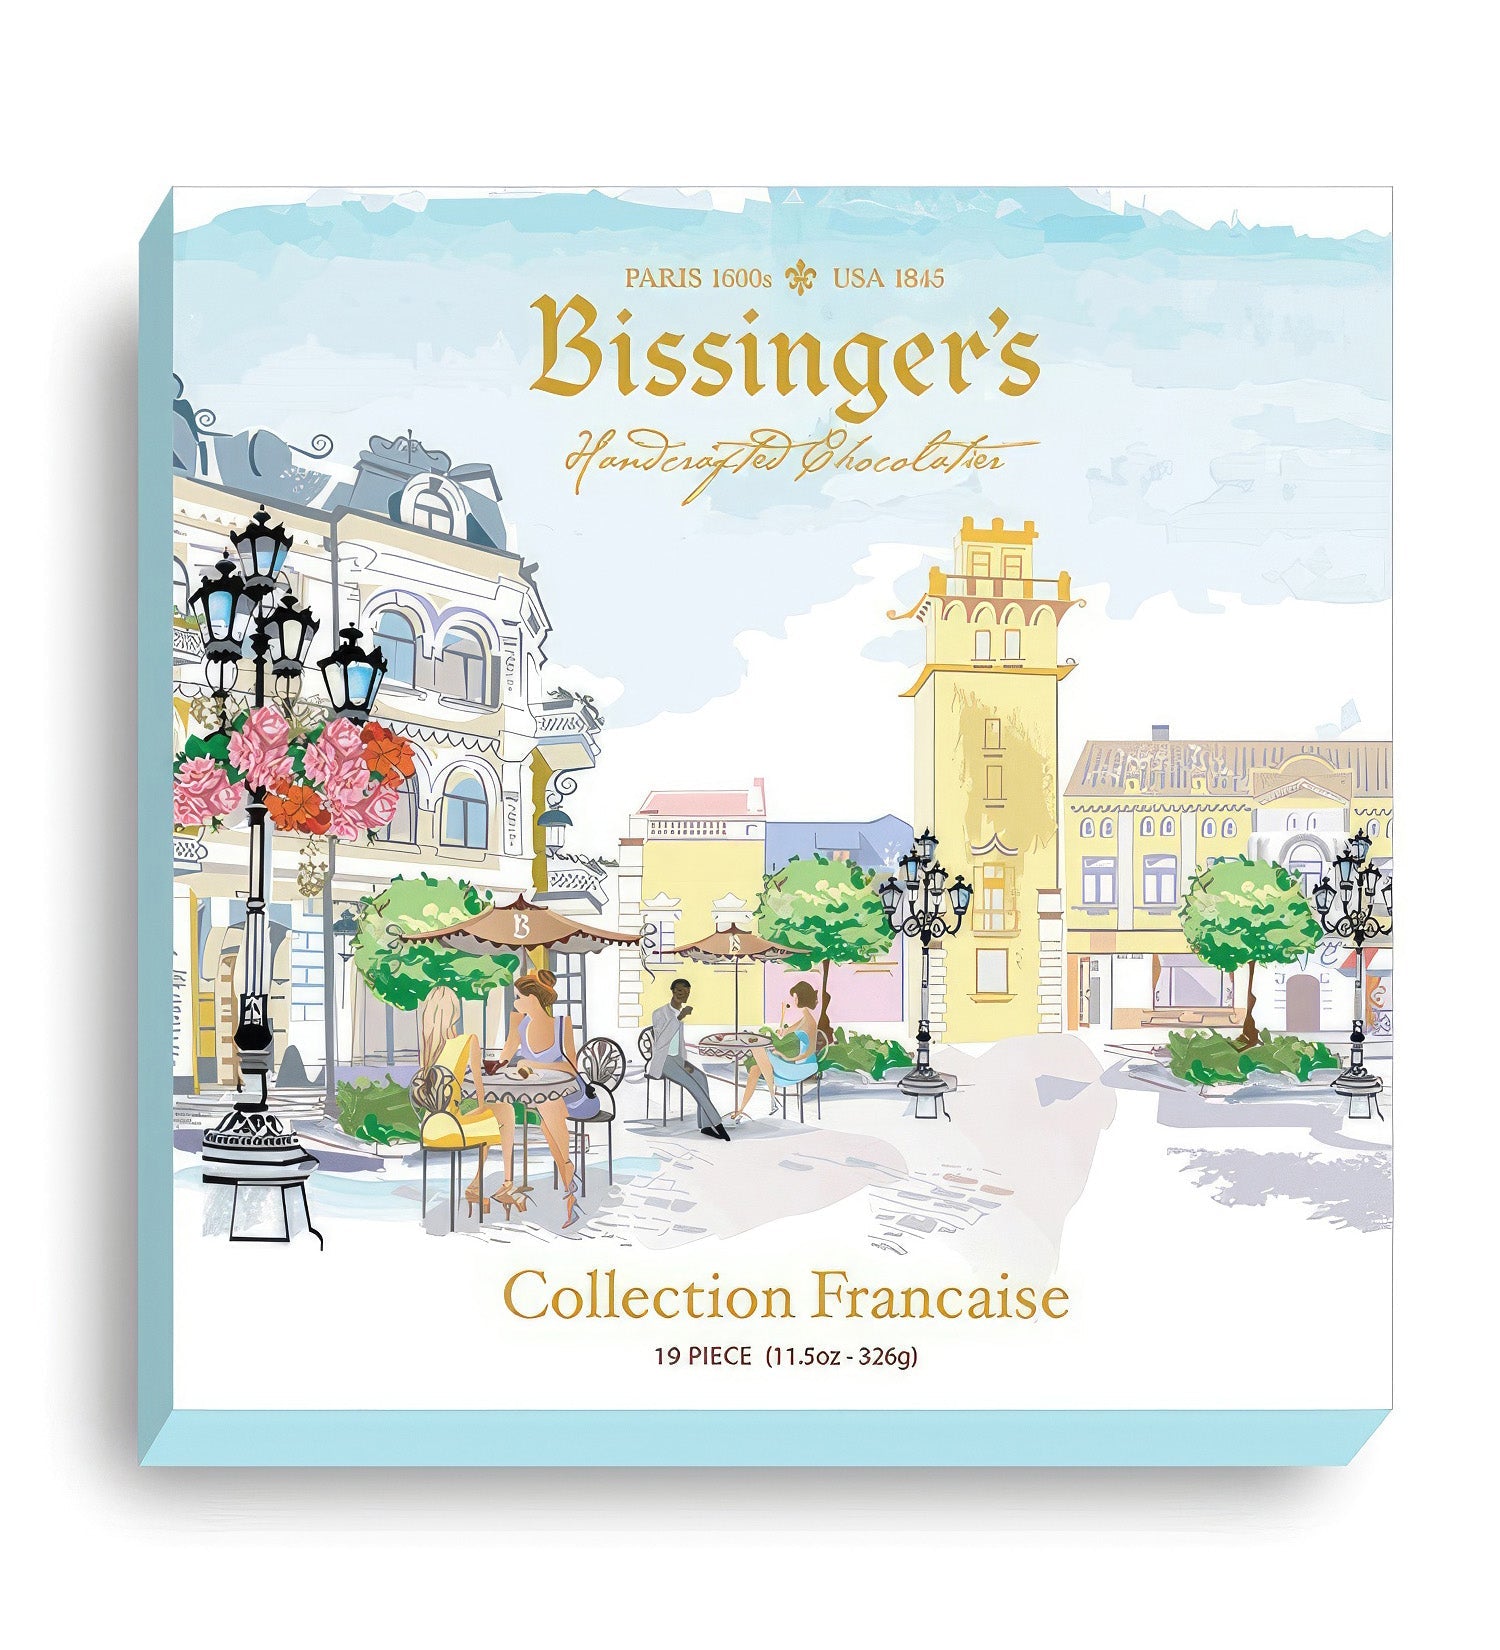 Bissinger's French Connection Chocolates